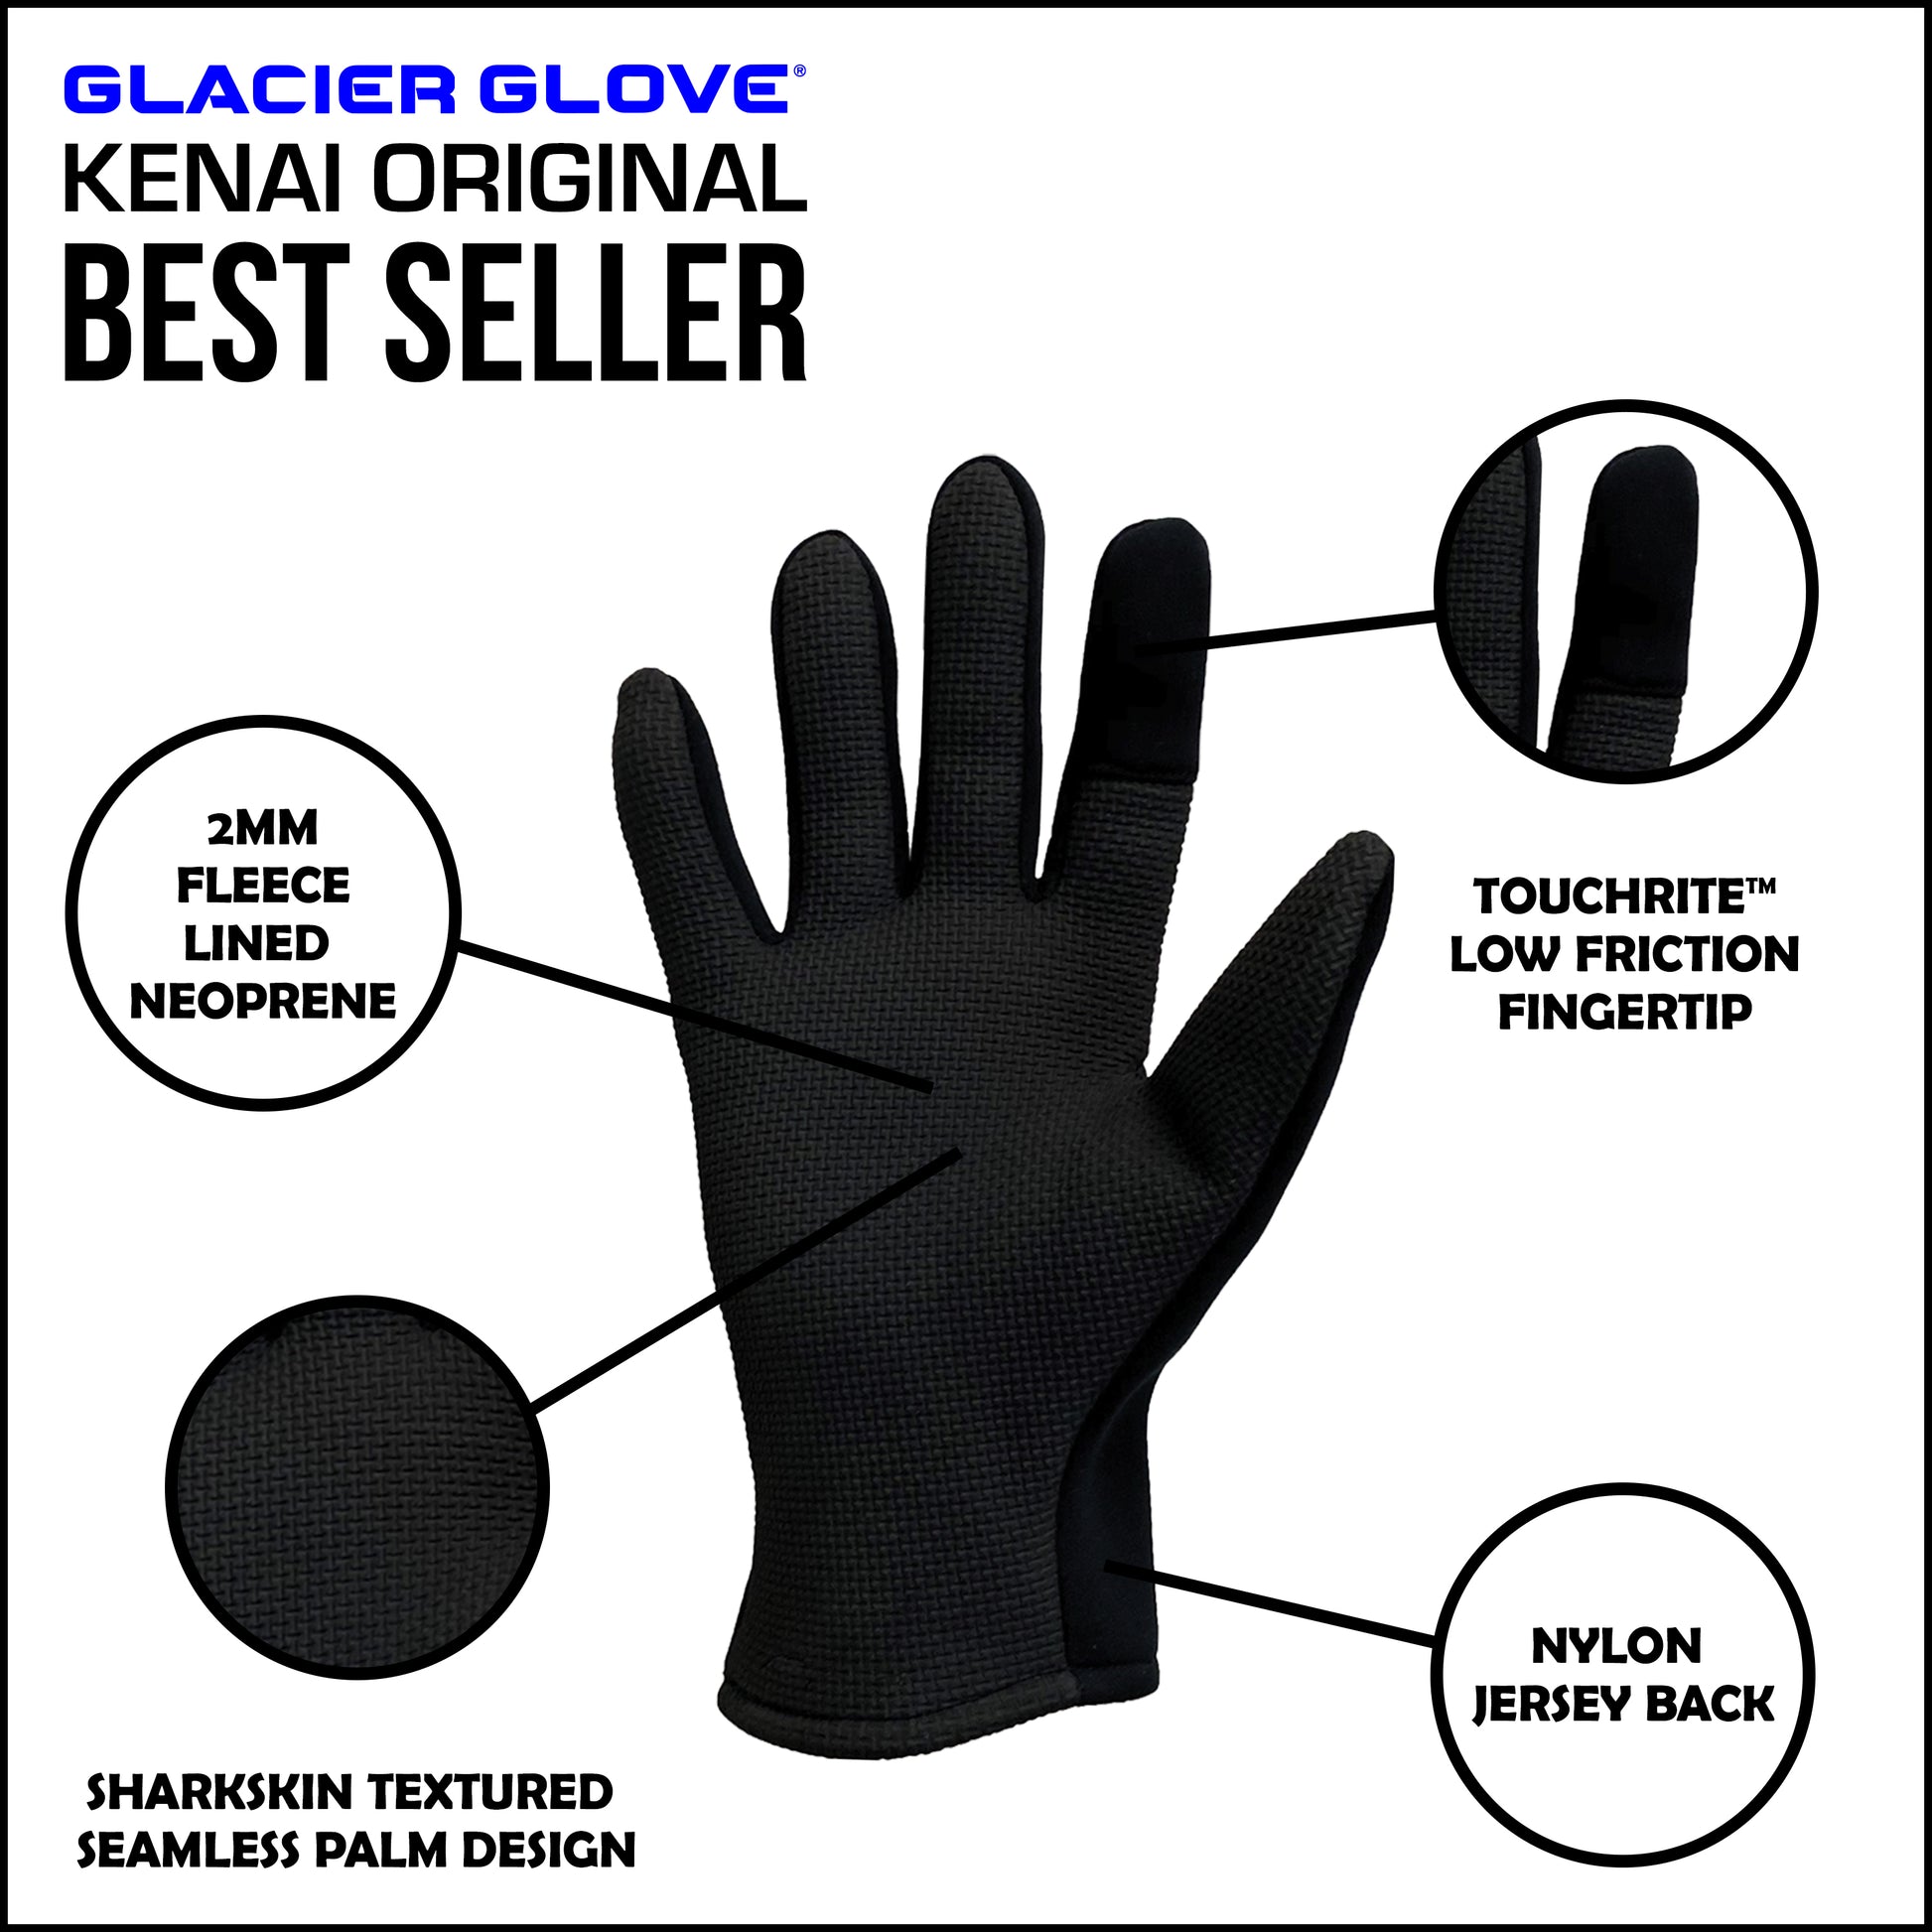 A proven workhorse for over 35 years, the Kenai Original Glove is one of our most popular gloves. This cold weather glove is designed to keep you outdoors while still giving dexterity where you need it. Crafted to withstand any adventure, this glove is perfect for any outdoor enthusiast.